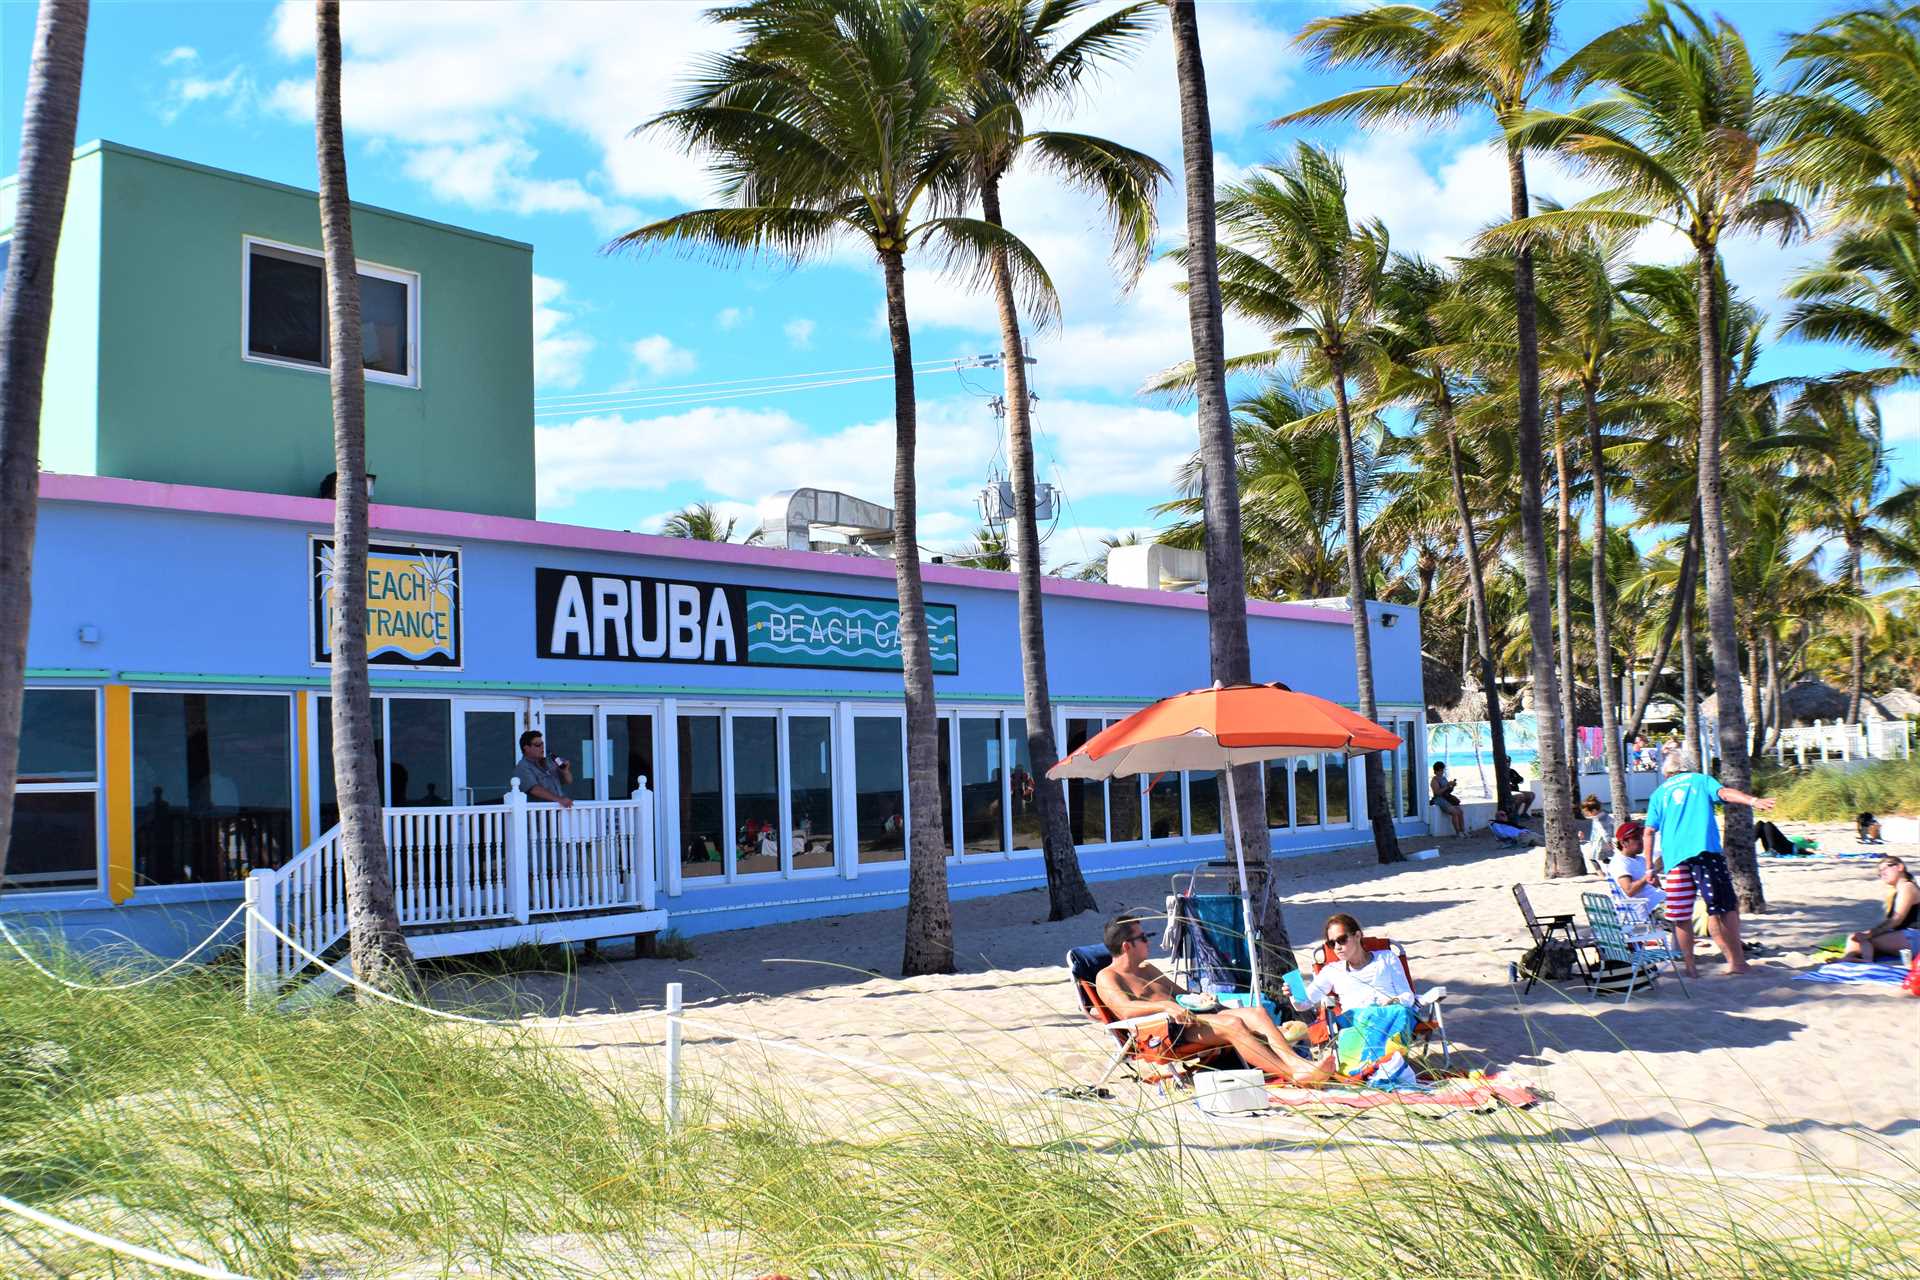 Remember to stop by the world famous Aruba Beach Cafe.